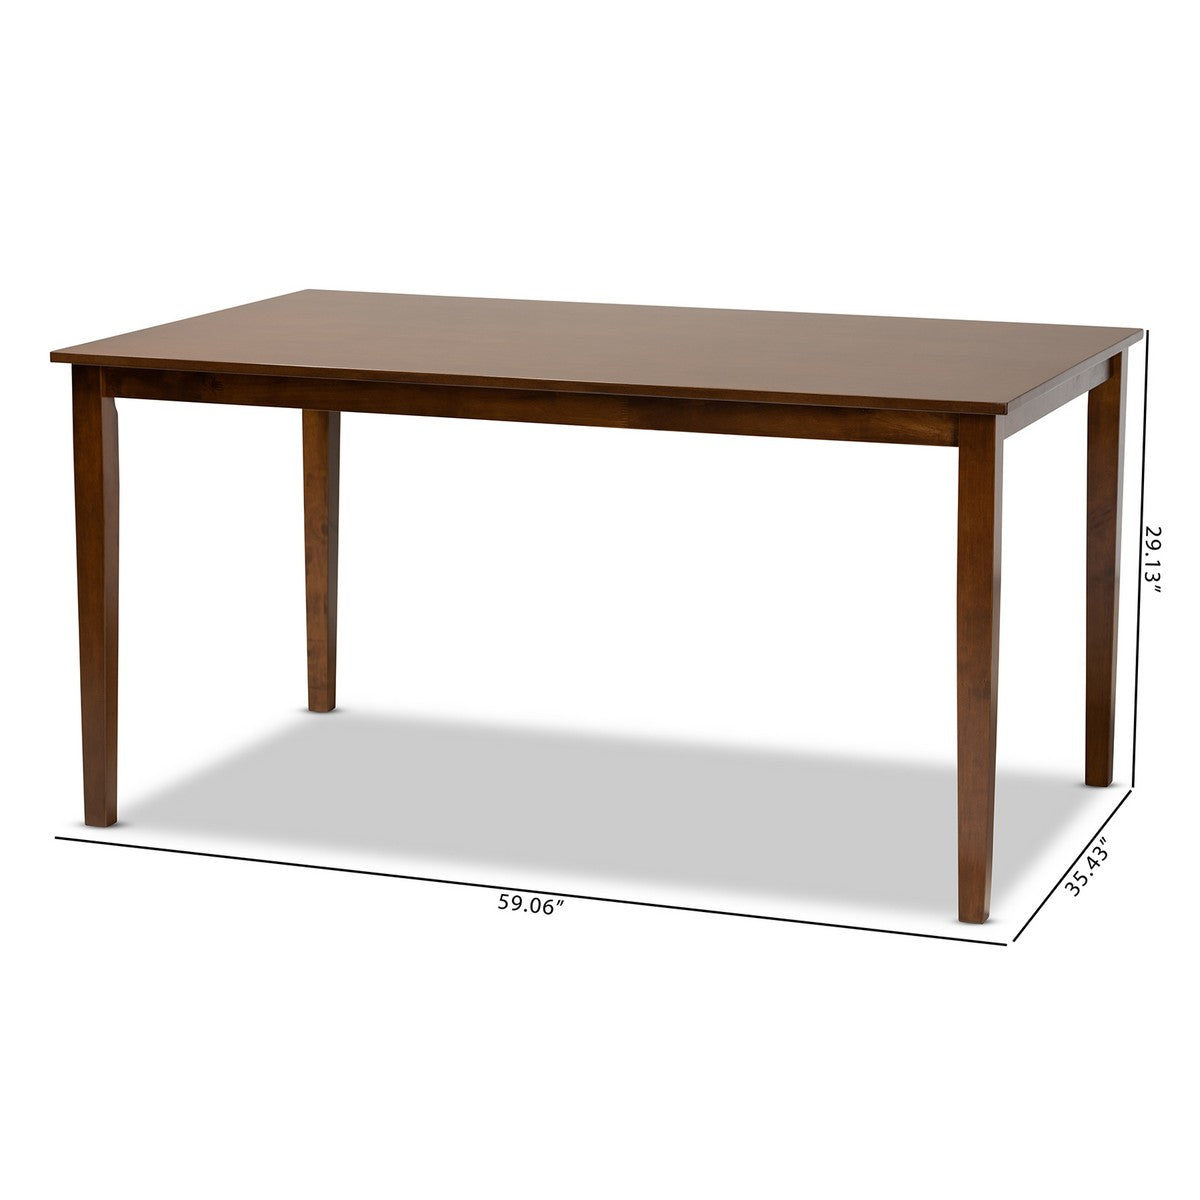 Baxton Studio Eveline Modern and Contemporary Walnut Brown Finished Rectangular Wood Dining Table